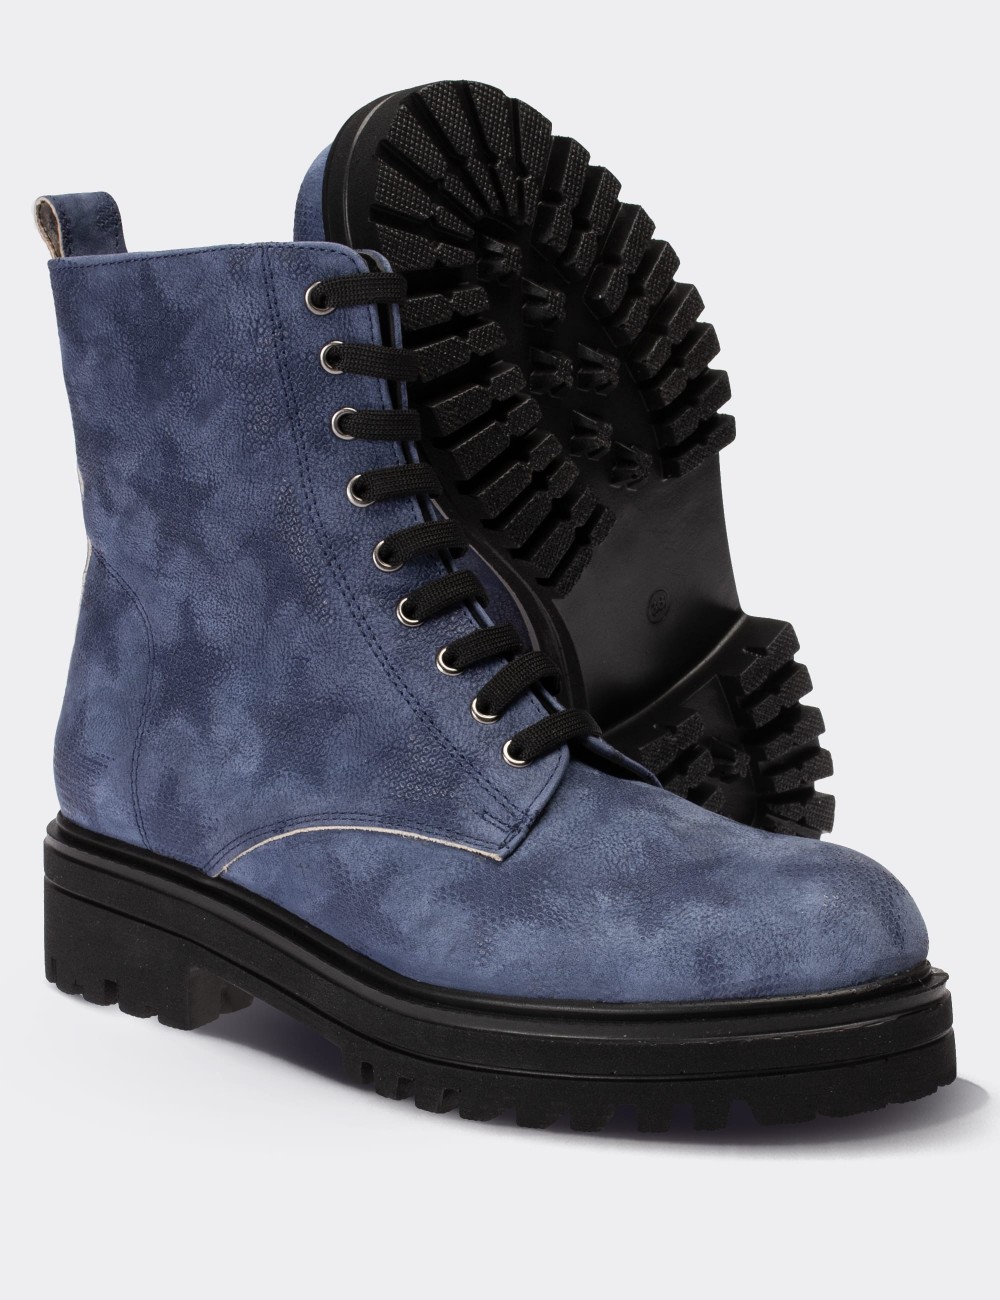 Blue Suede Leather Postal Boots - 01814ZMVIE07